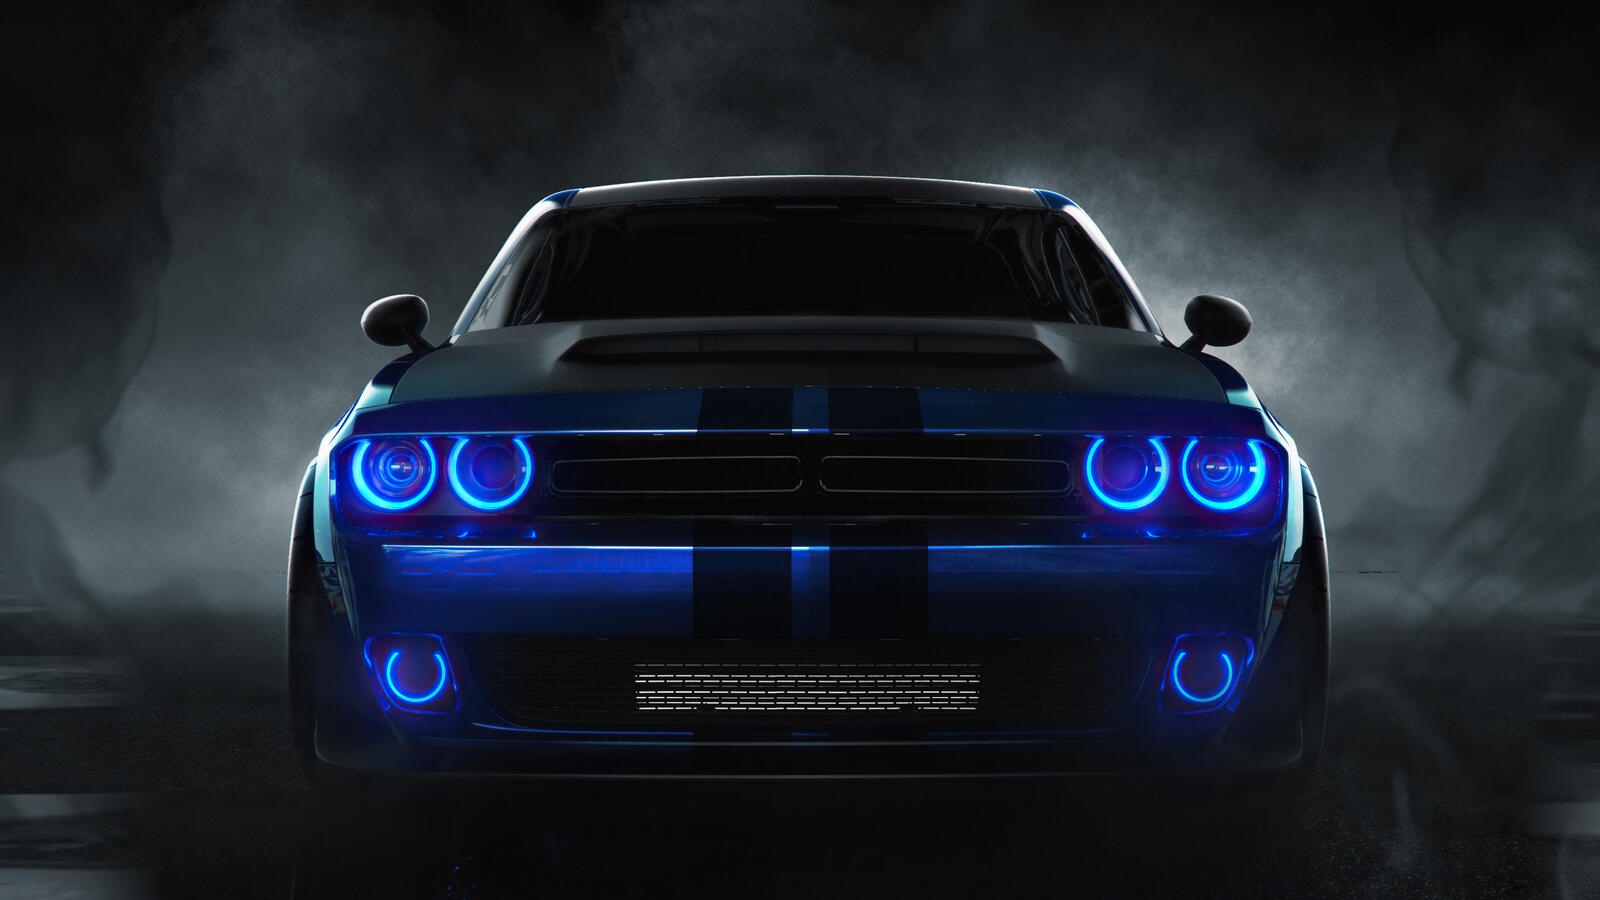 Wallpapers Dodge cars 2021 cars on the desktop